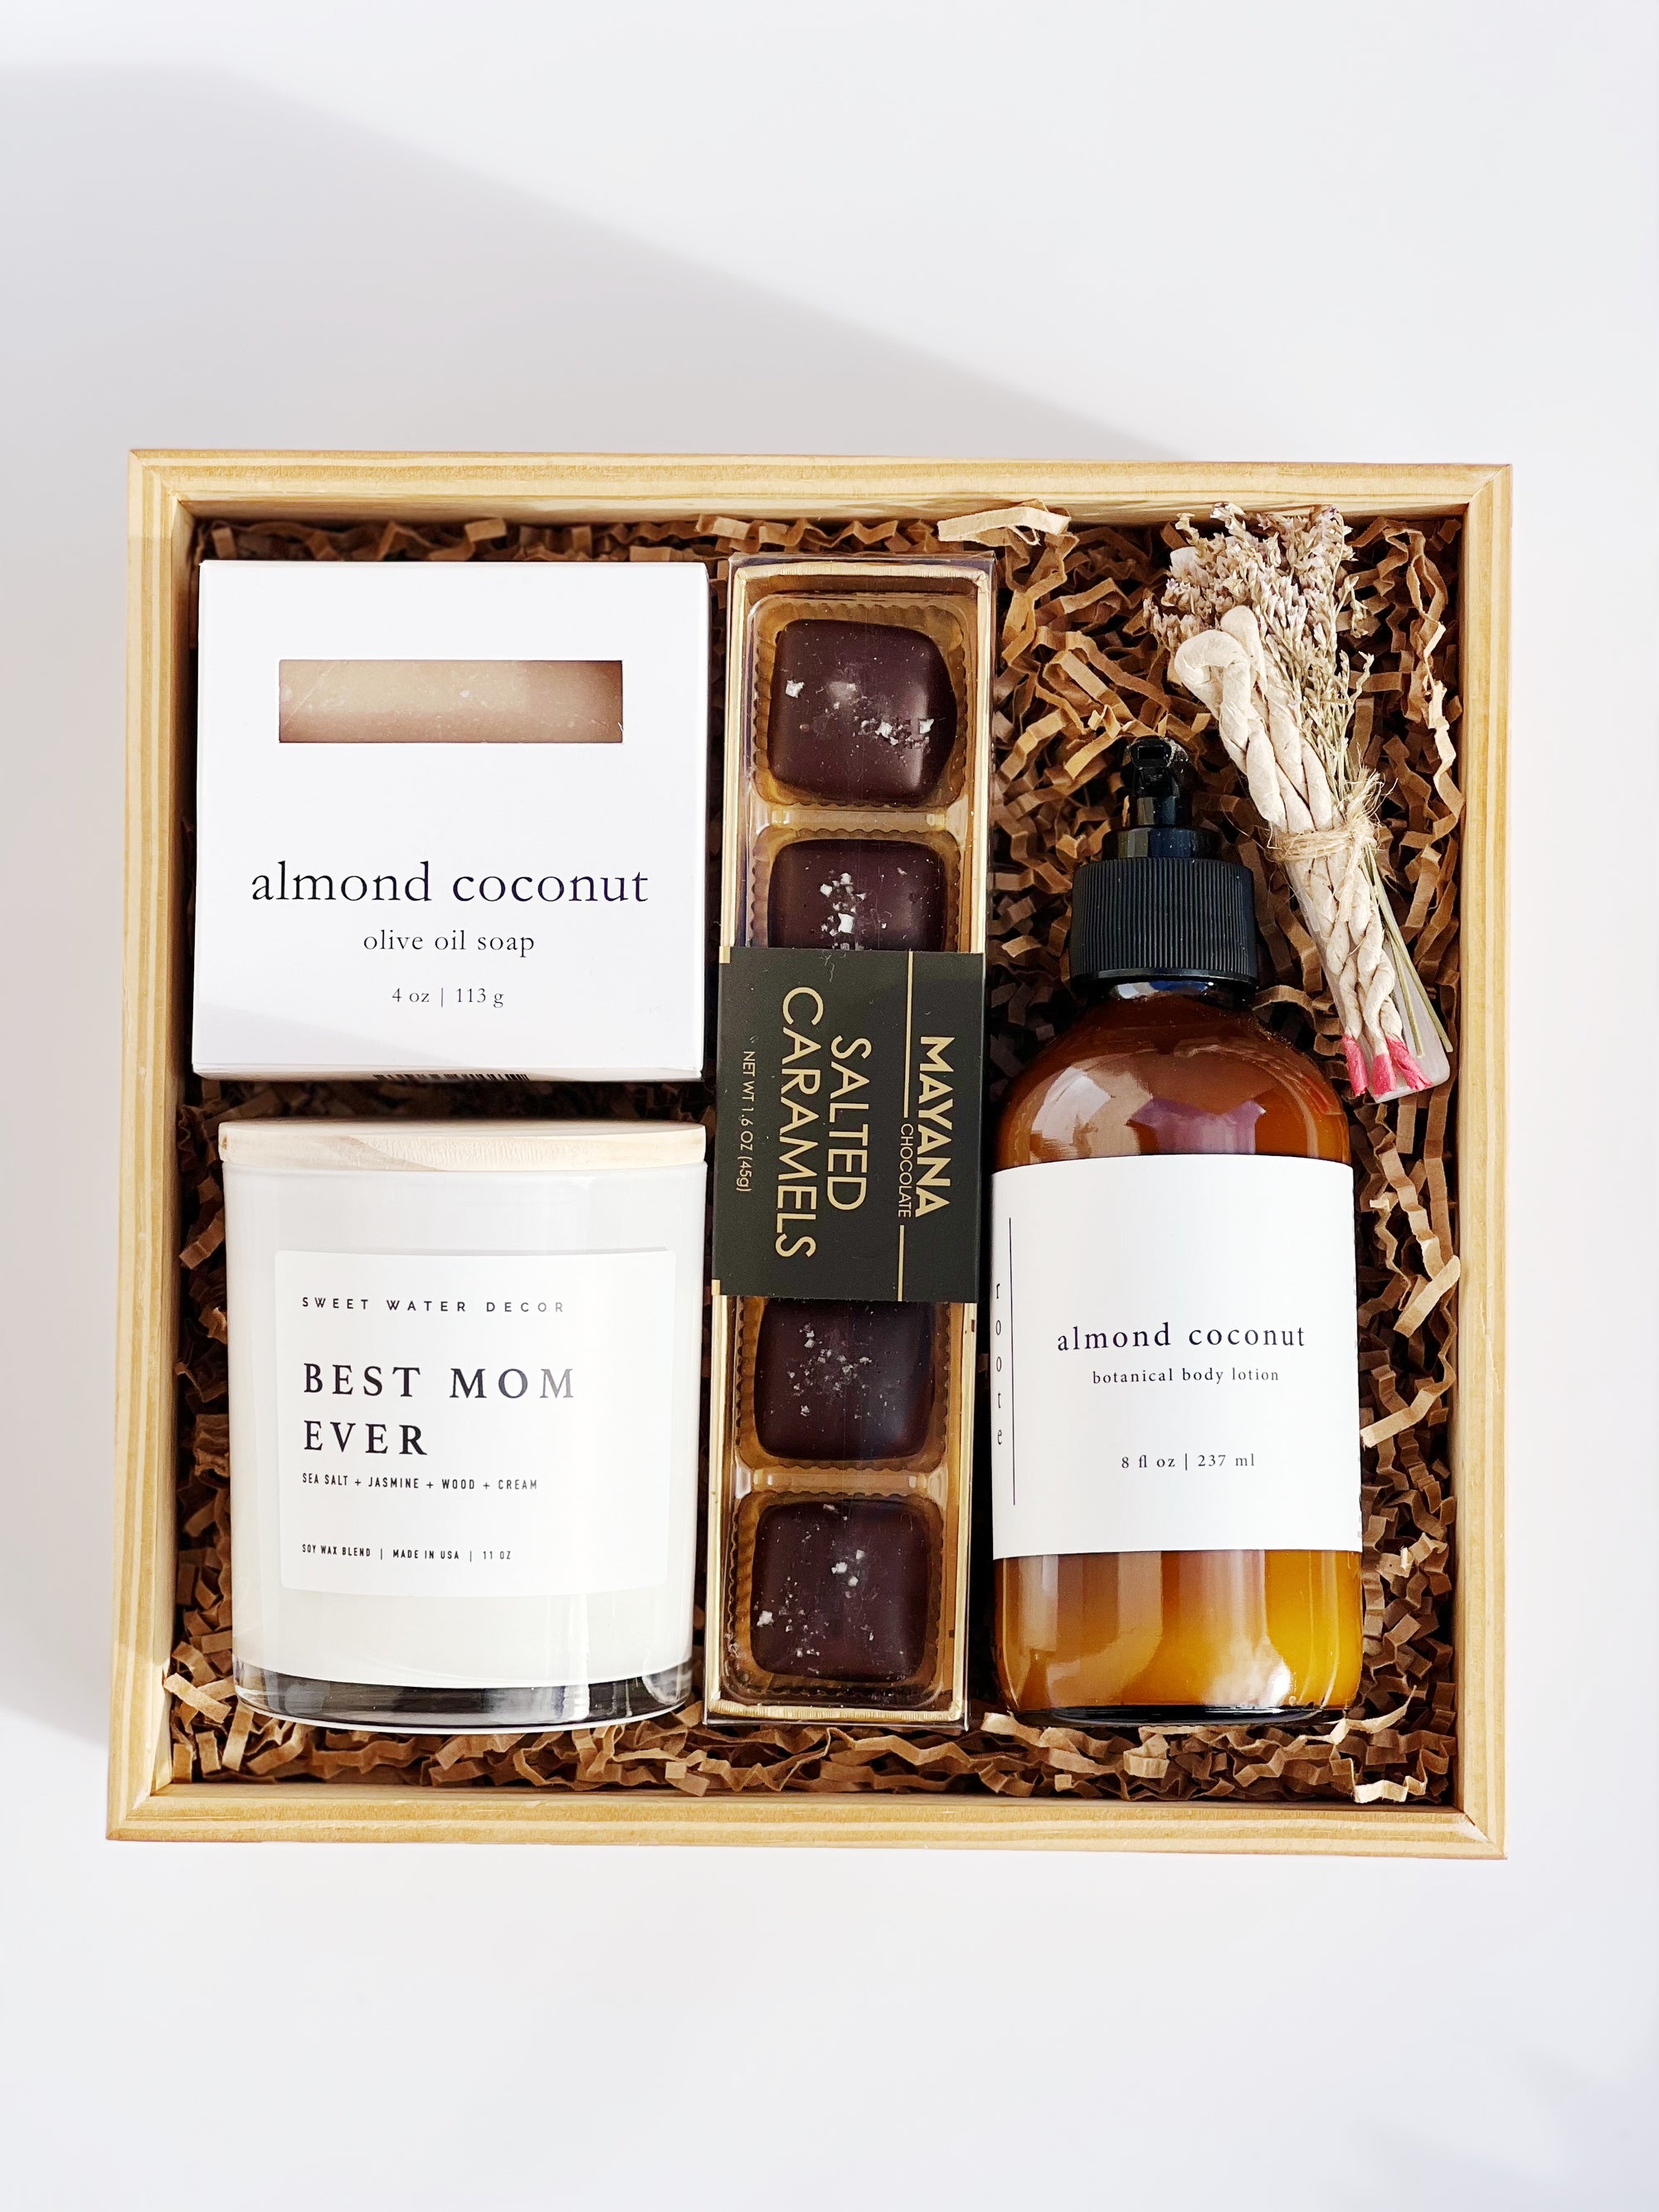 The Best Mom Almond Coconut Box